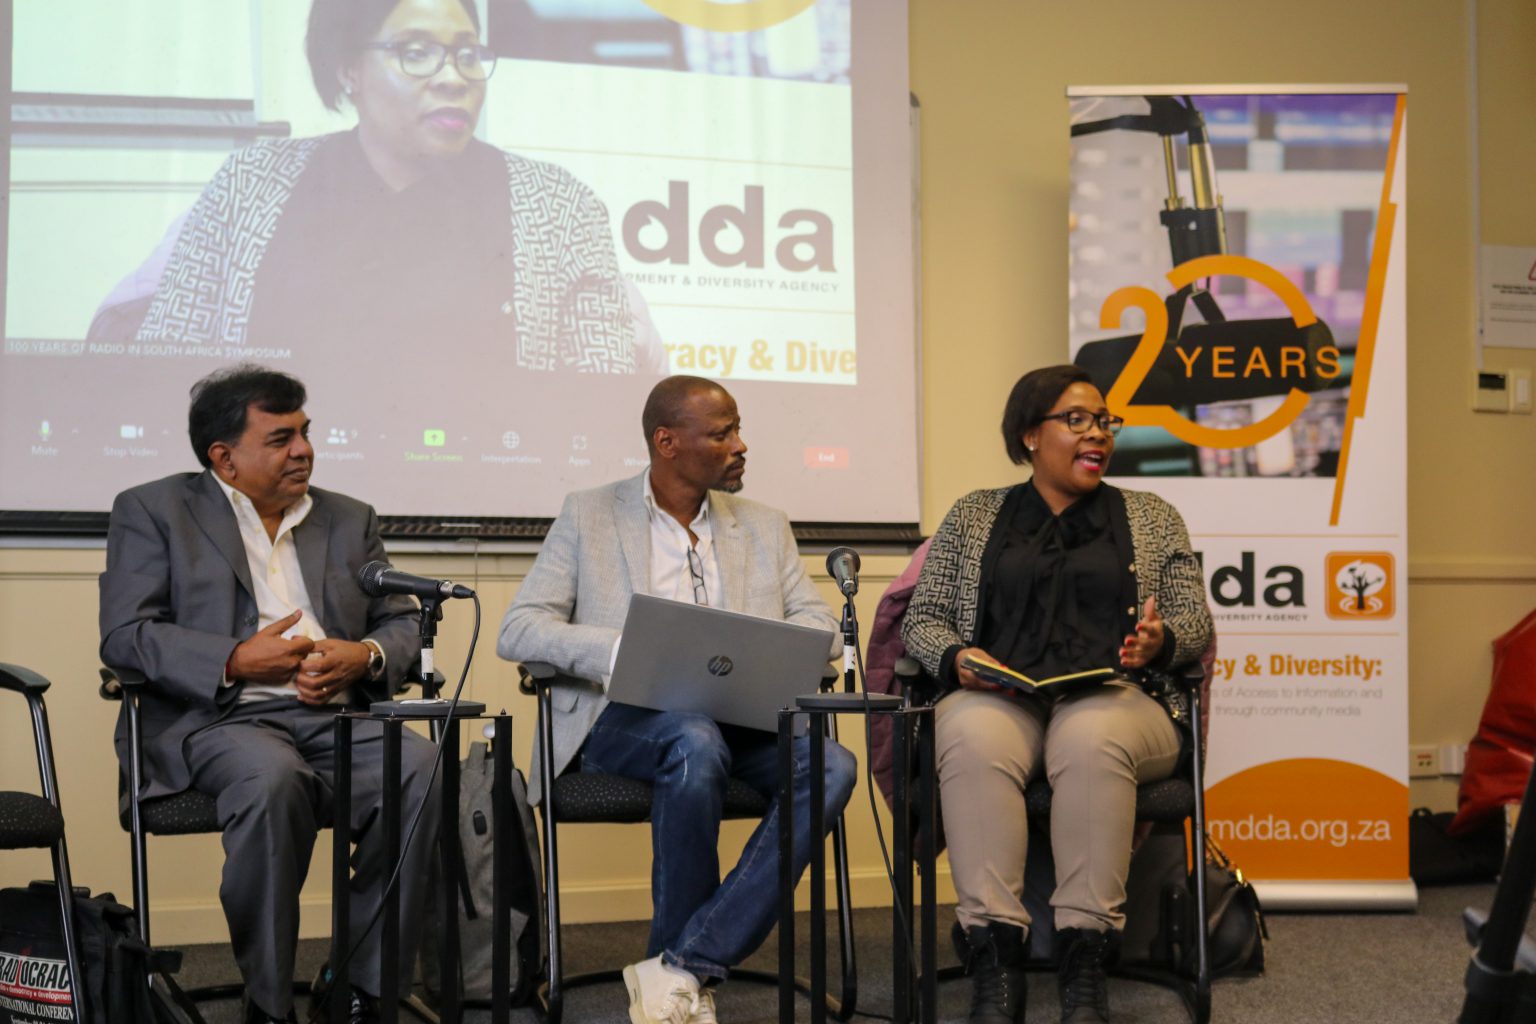 Keynote speaker, adv, Robin Sewlal and authosr of My Radio Memory with panelists: Prof. Gilbert Motsaathebe & Dr Sisanda Nkoala, editors of the Vol 1 & Vol 2 of 100 Years of Radio in South Africa. Photo: Sourced